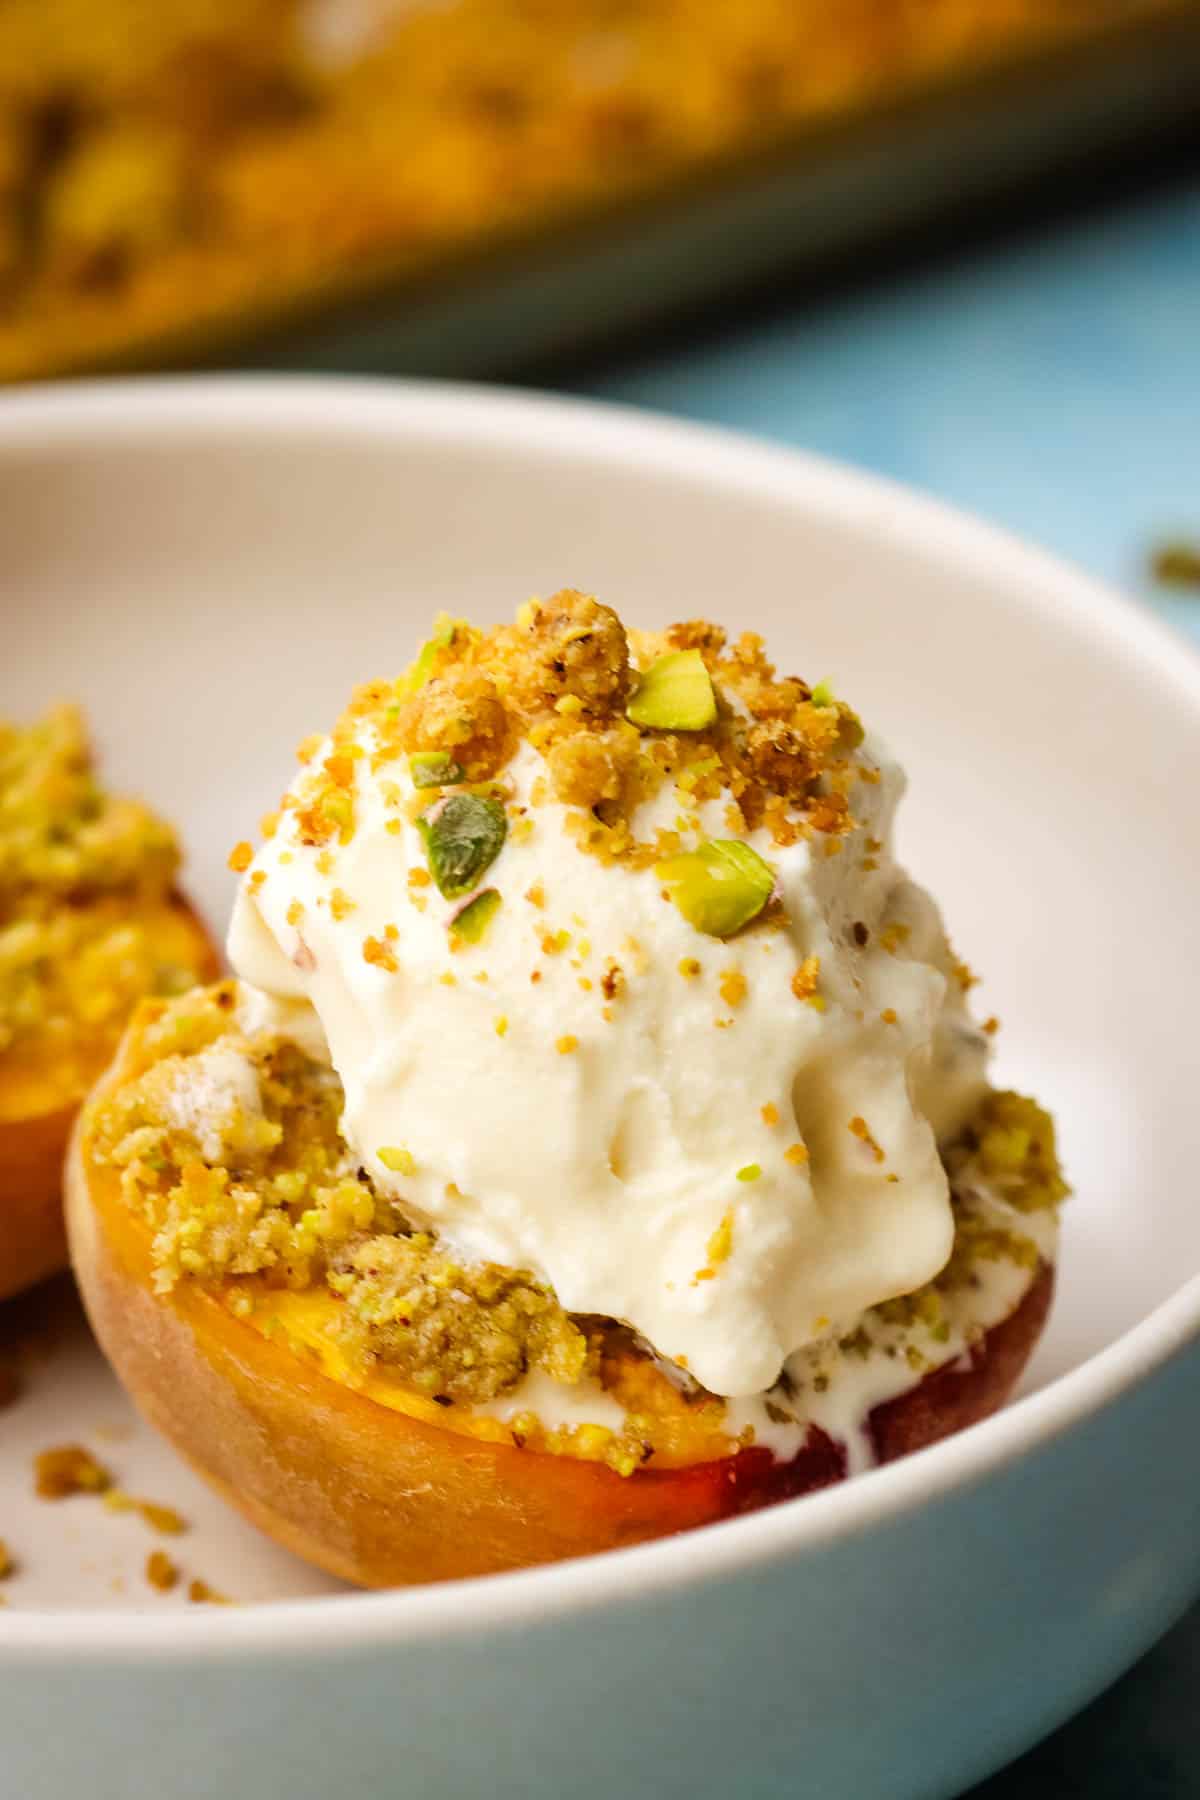 Roasted, halved peaches in a bowl with a scoop of vanilla ice cream and pistachio crumble.